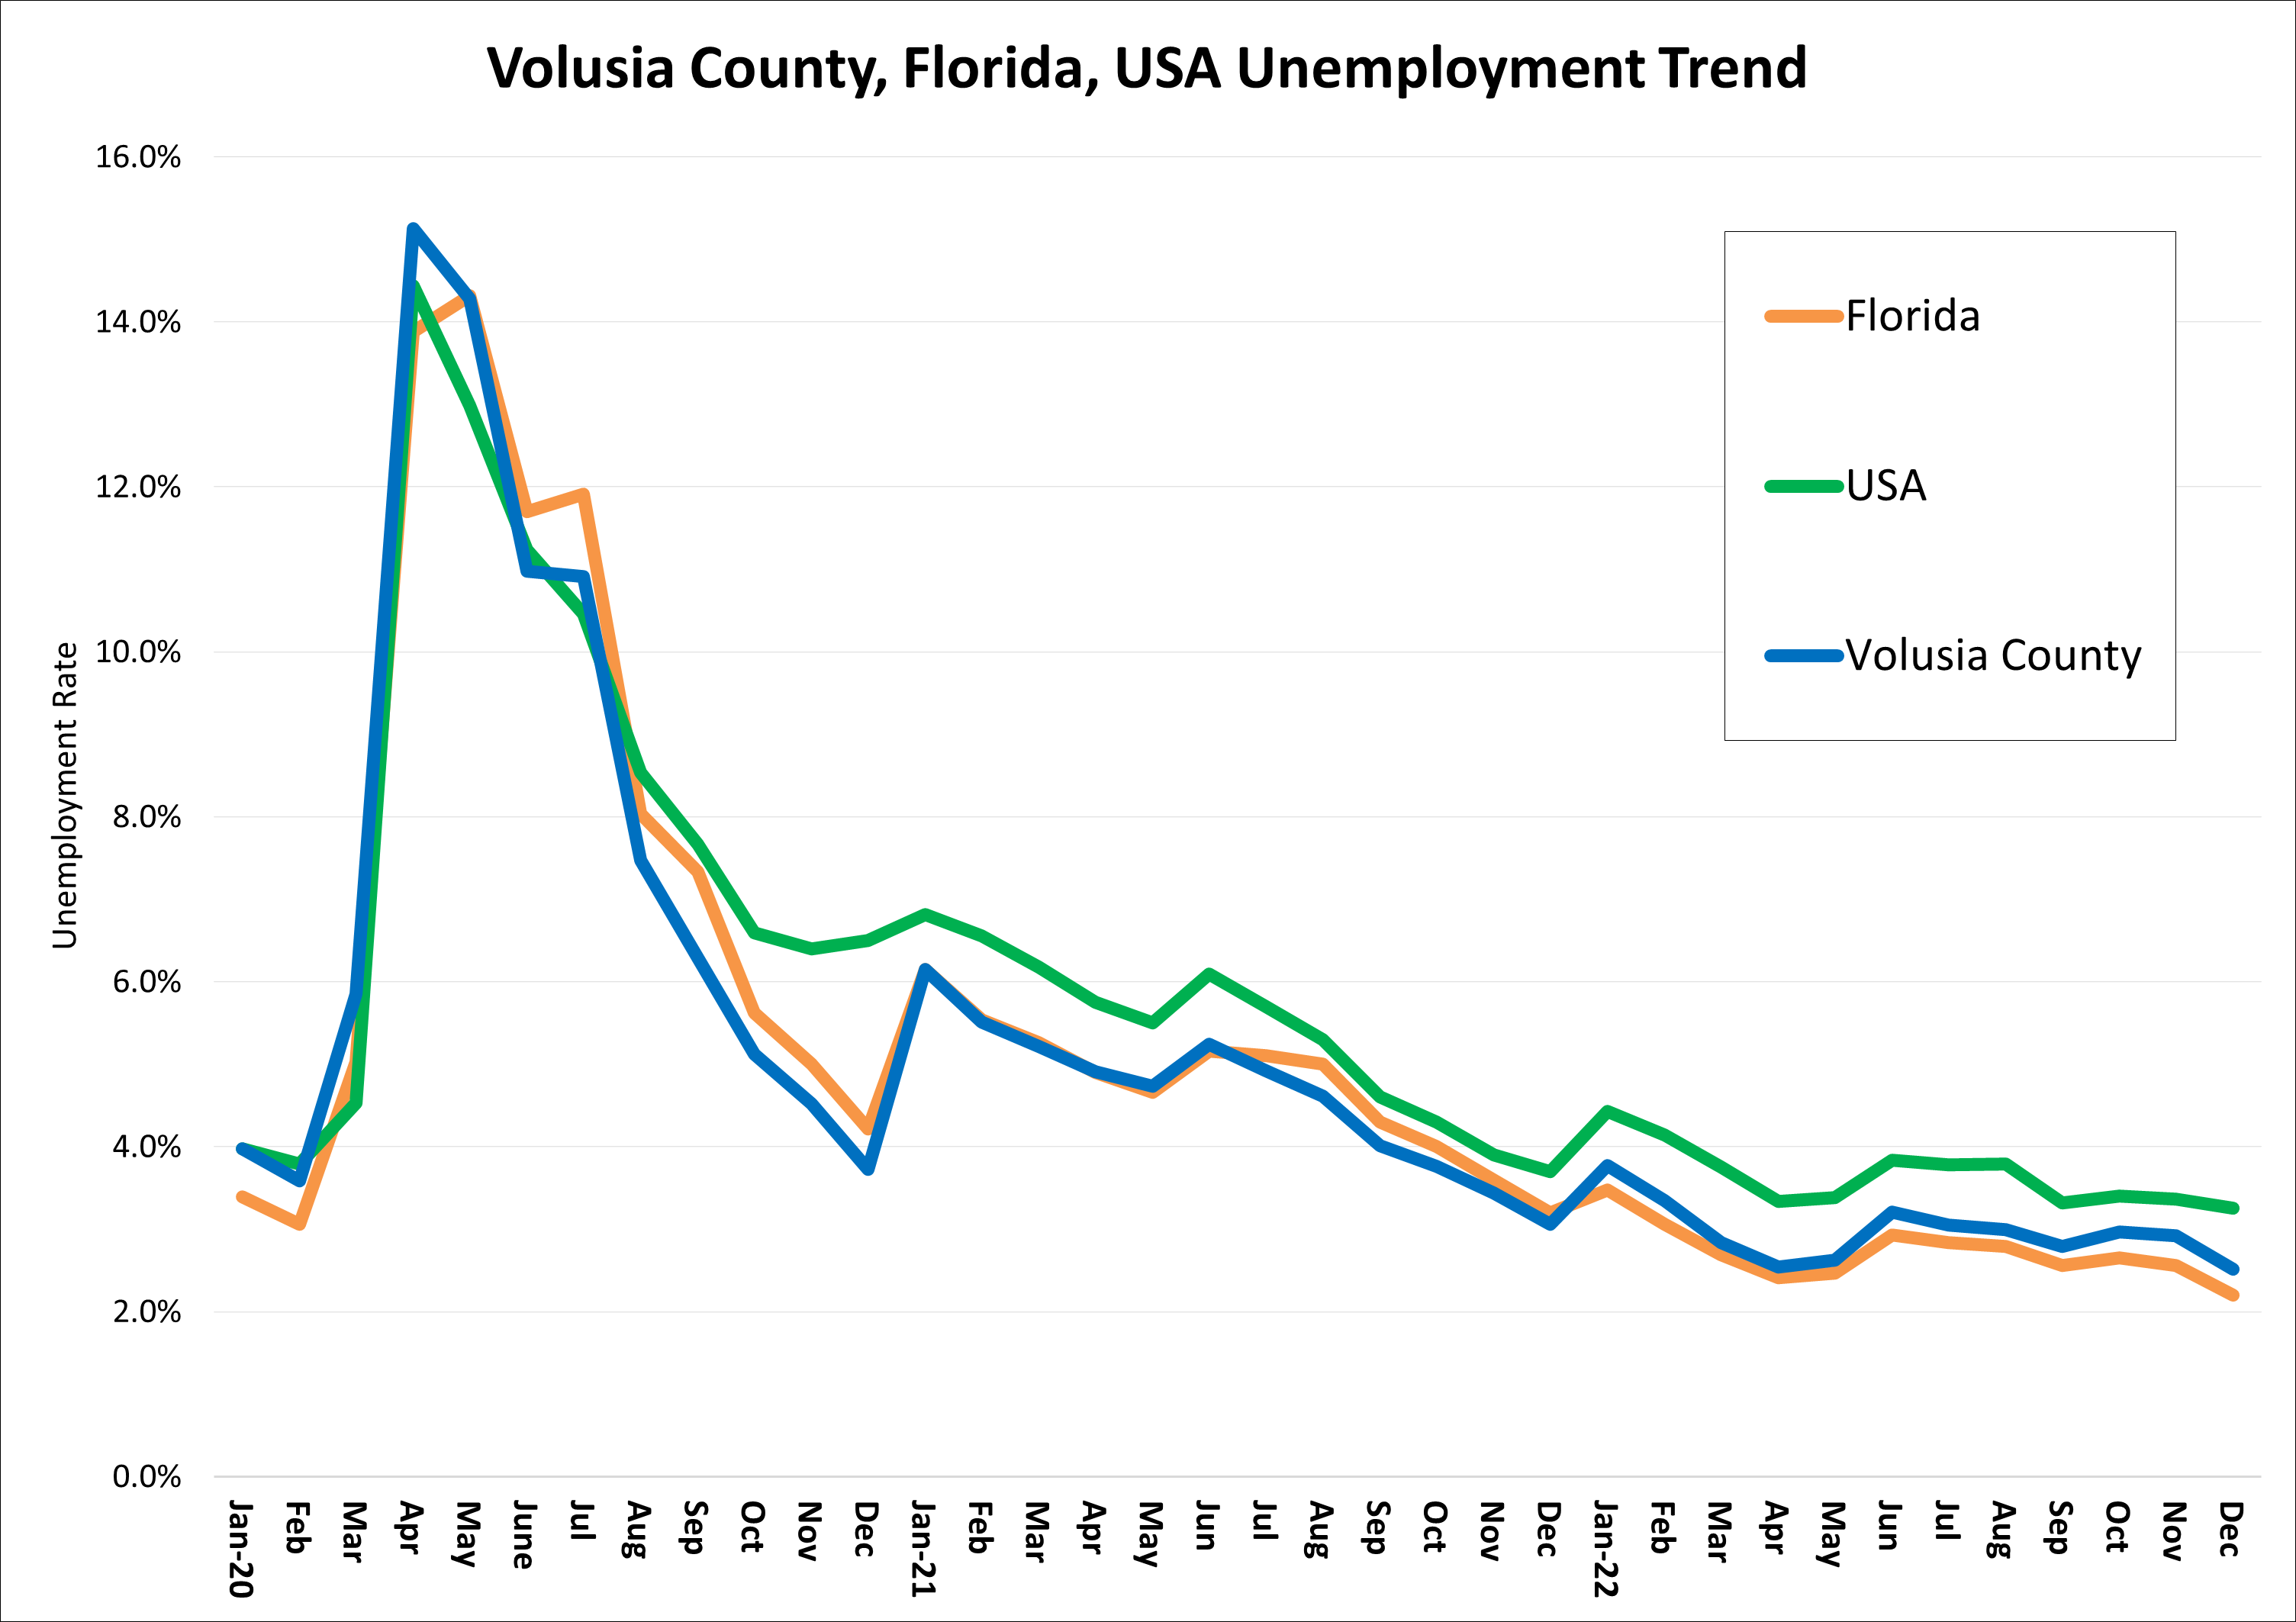 The chart is showing the unemployment rate trend for Volusia County, Florida, and the US. After the impact of COVID, Volusia County's unemployment rate has steadily decreased and is current at 2.5% as of Dec. 2022.